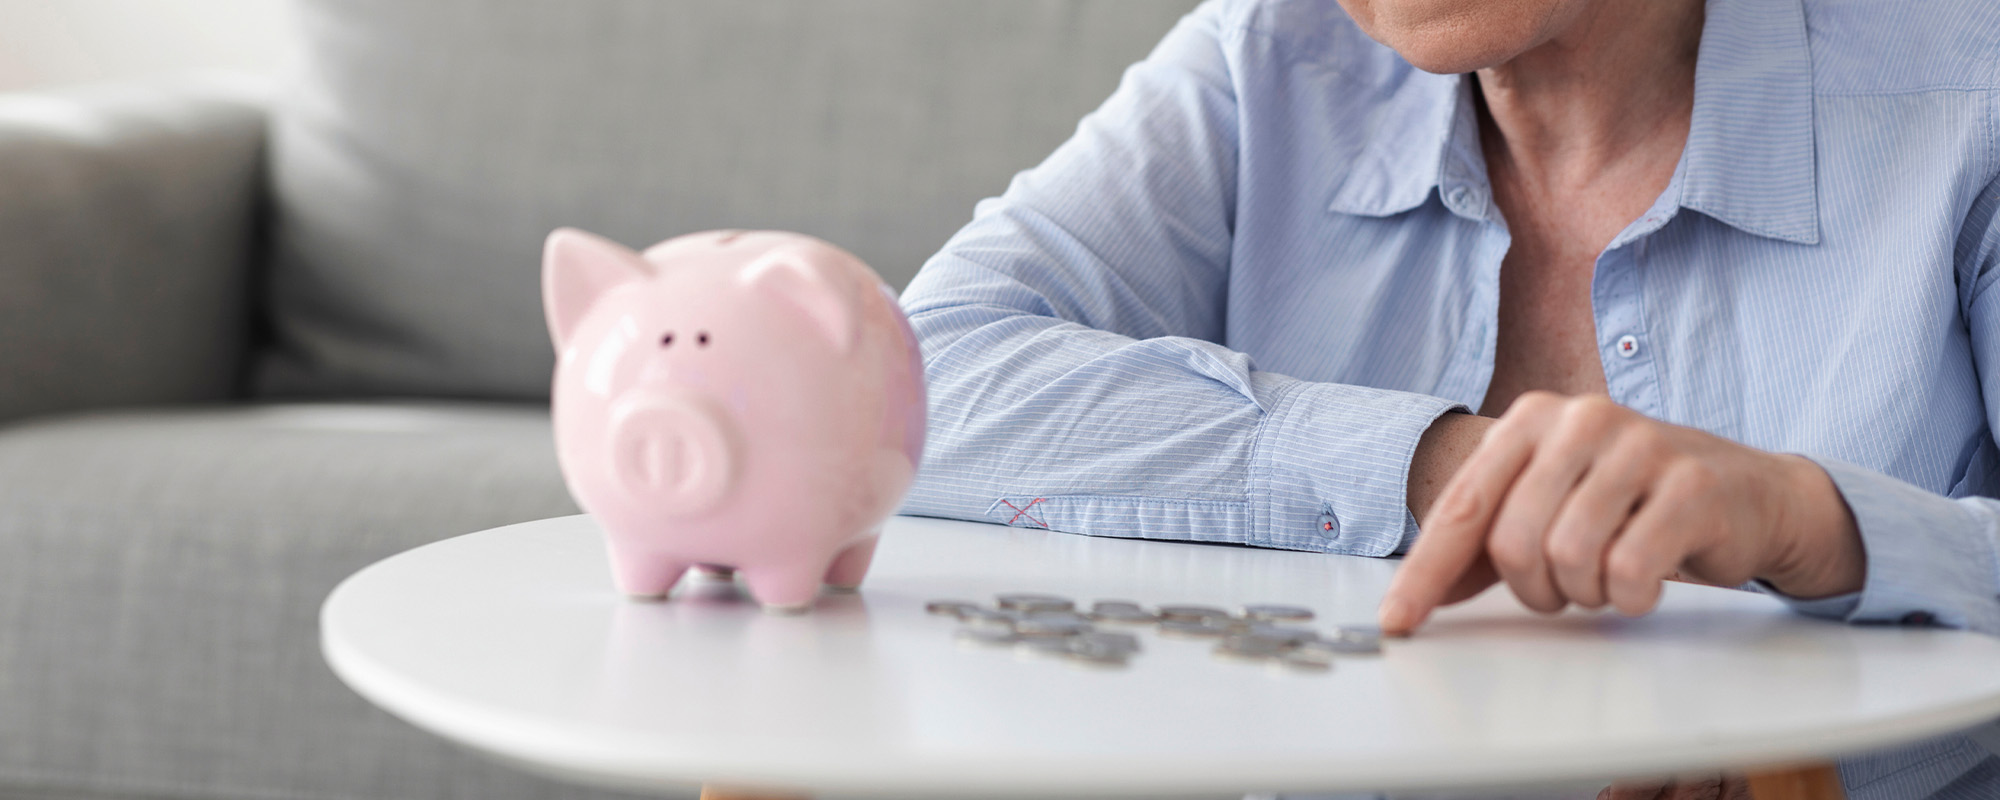 no retirement savings. upset elderly woman counting coins from piggy bank